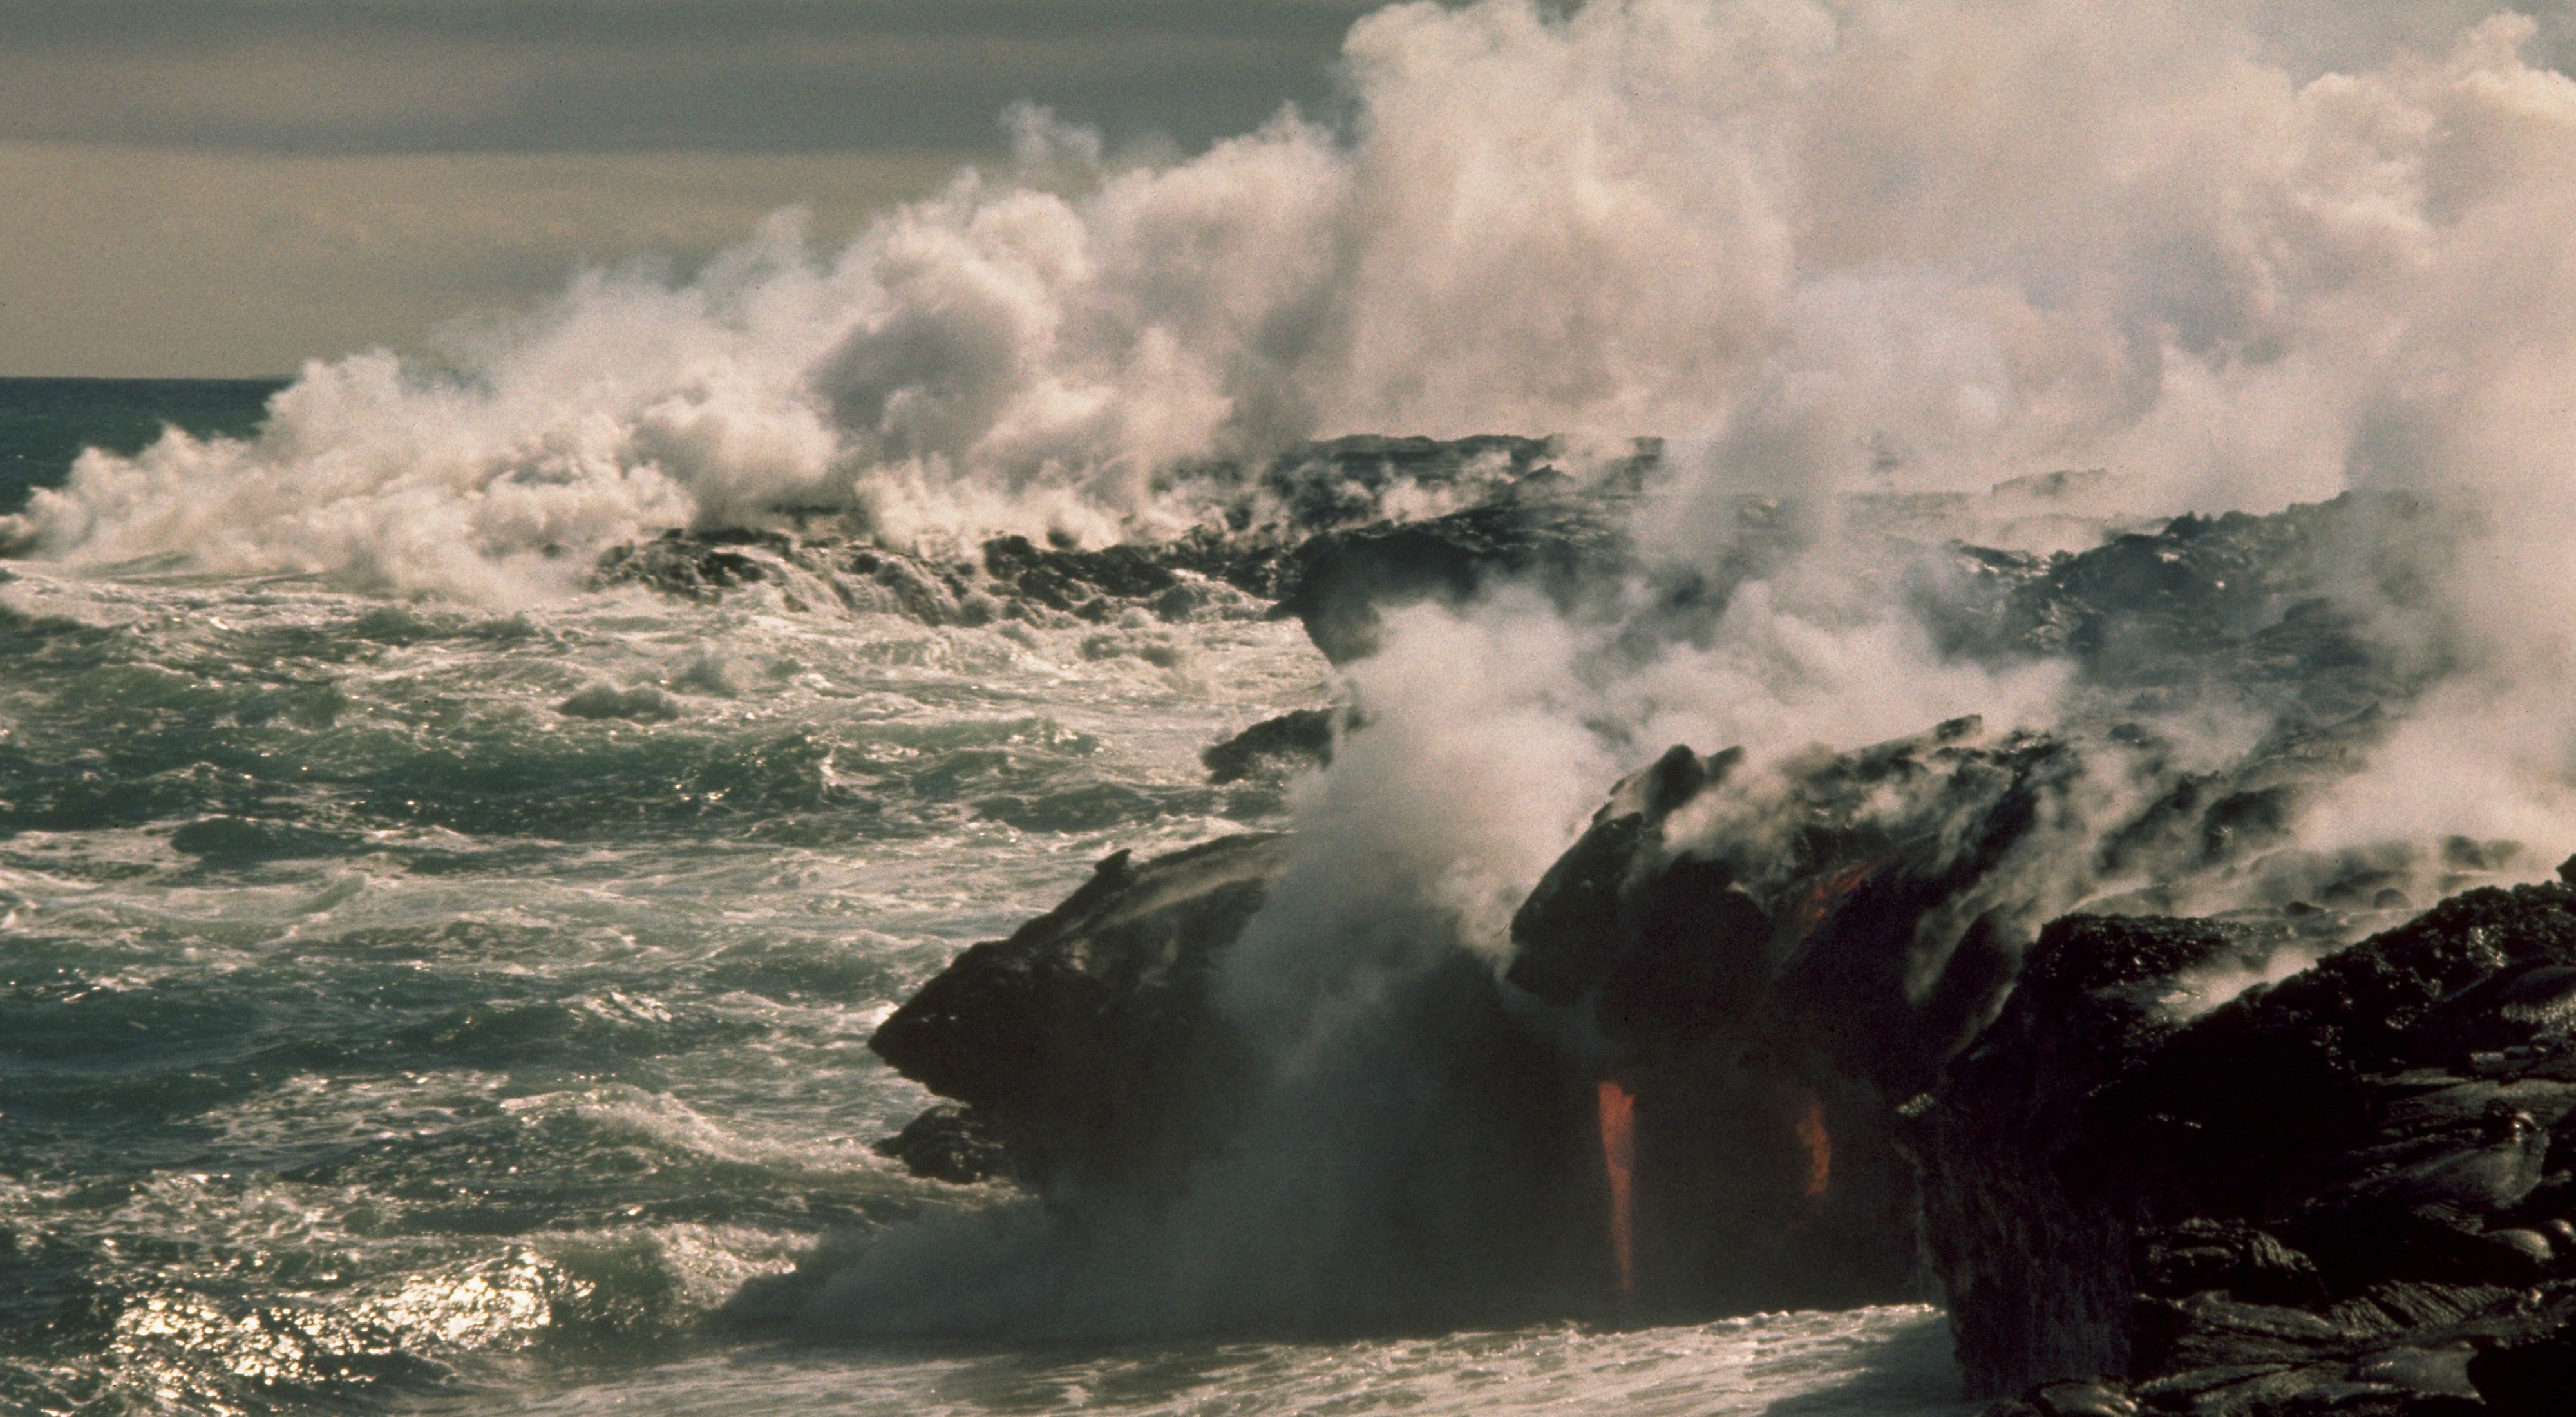 Molten lava flows into the sea creating clouds of steam at Hawai'i Volcanoes National Park.